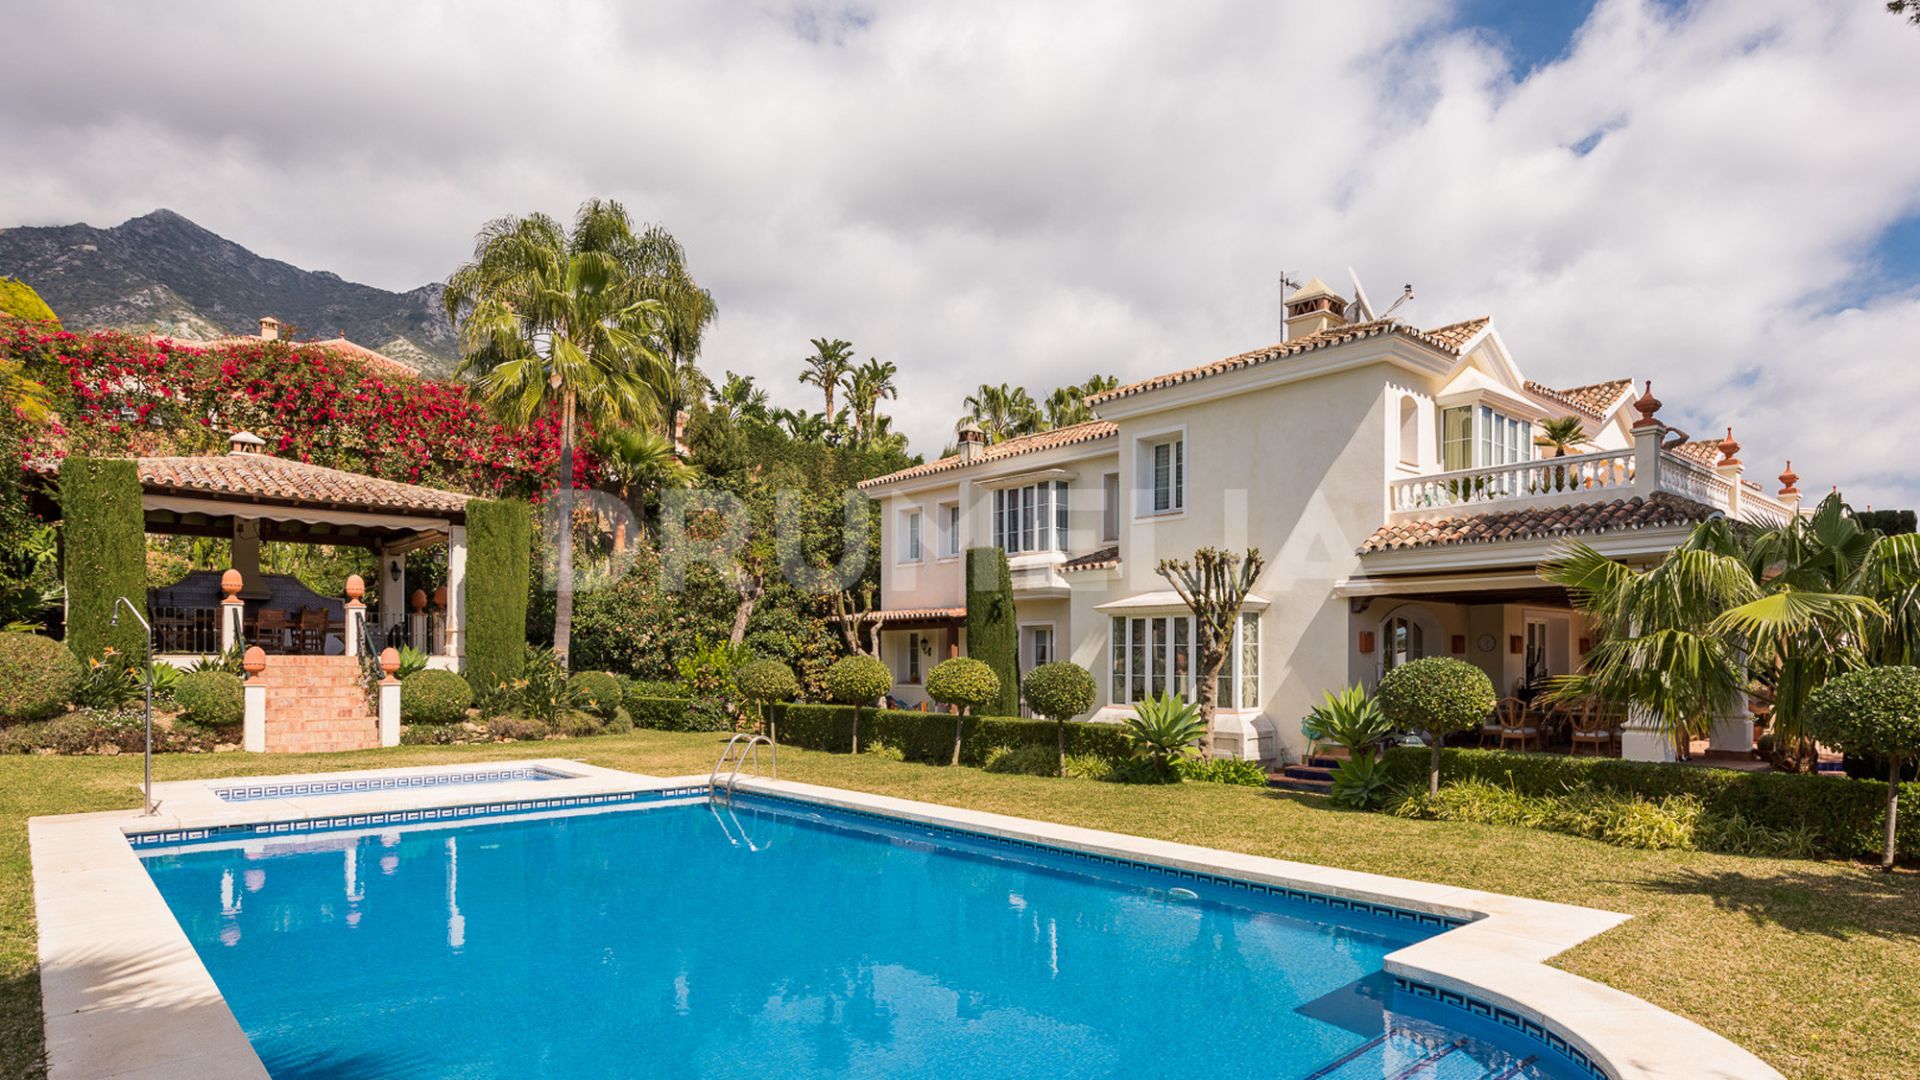 Elegant Luxurious House with Amazing Panoramic Views in Sierra Blanca, Marbella's Golden Mile